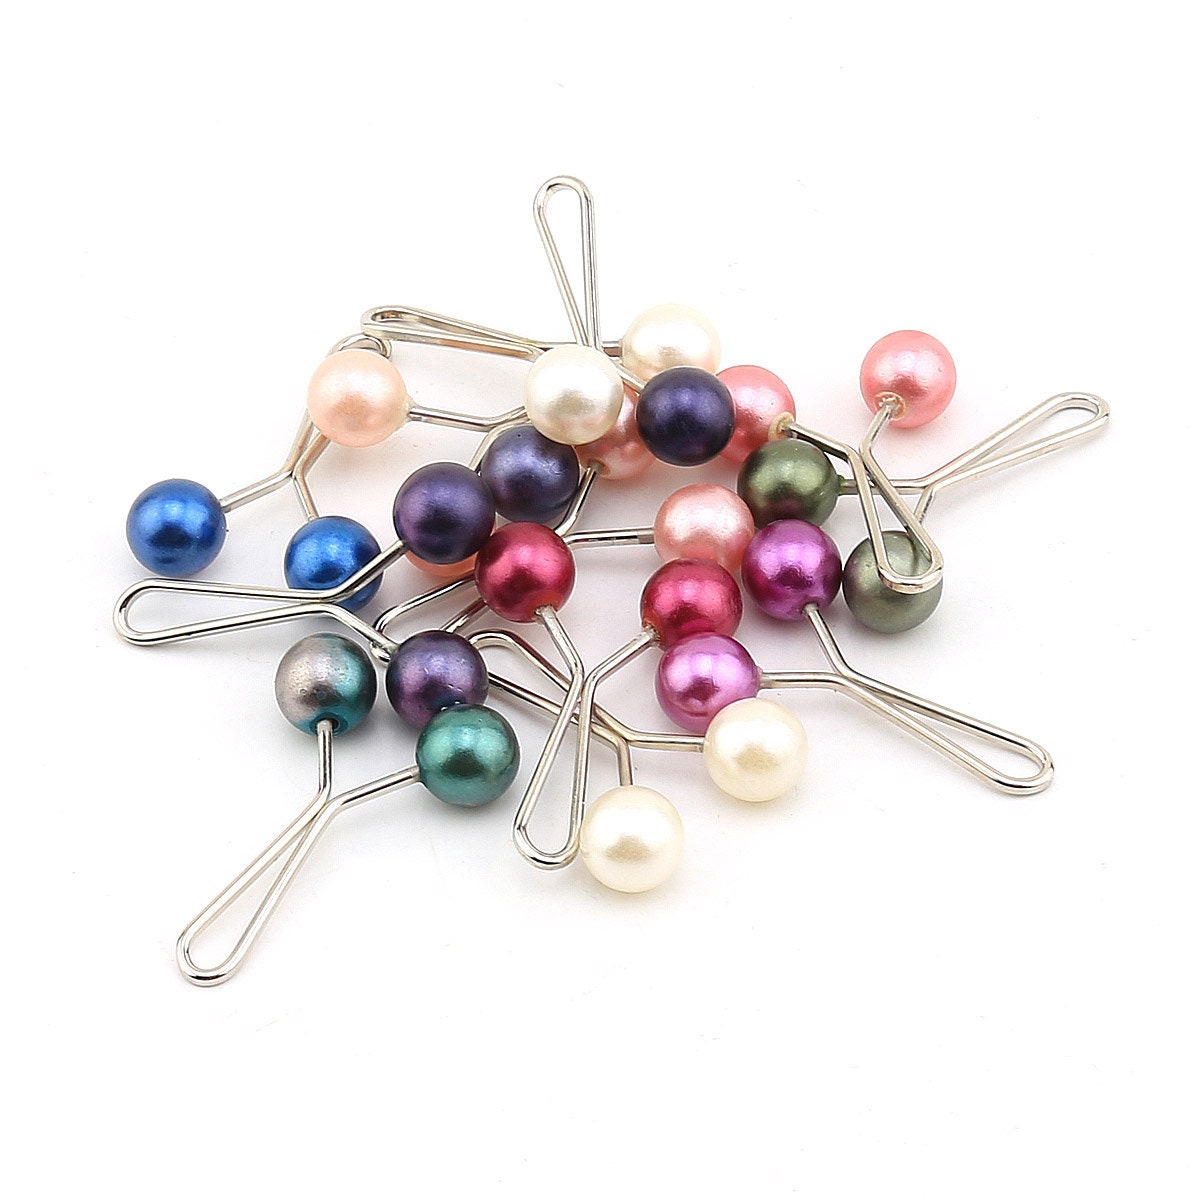 100pcs Women's Fashionable Scarf Pins In Box, Shawl Clips